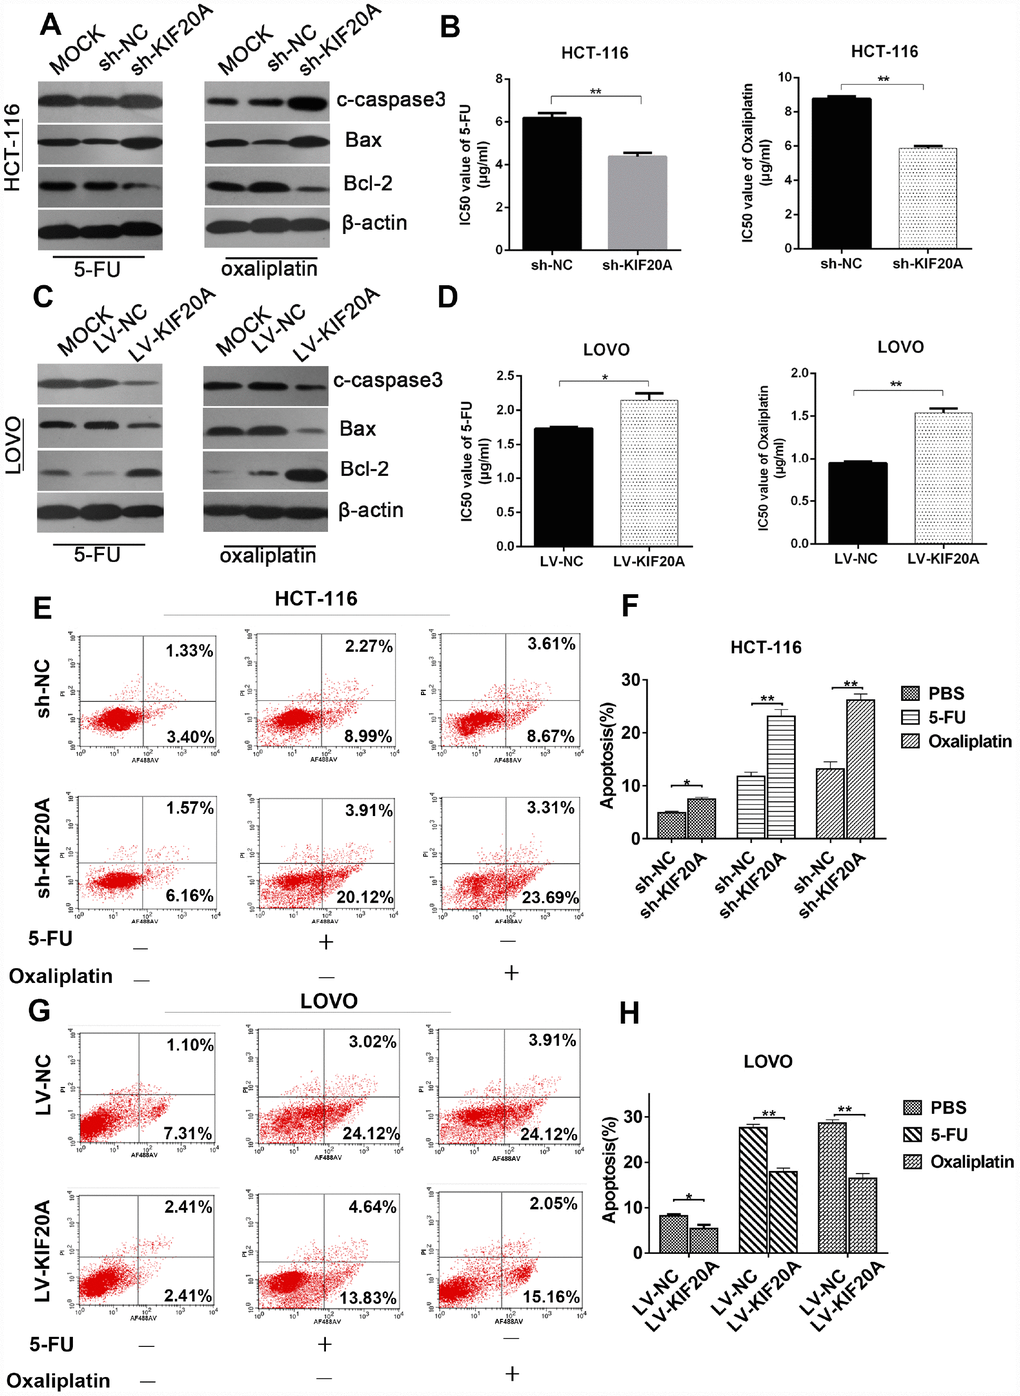 KIF20A induces chemo-resistance in CRC. (A, C) Western blot analysis of apoptosis-related factors (cleaved-caspase 3, bax, bcl-2) in different transfected groups in HCT-116 cell line treated with 4ug/ml 5-FU (left) or 8 ug/ml oxaliplatin (right) and LOVO cell line treated with 1.5 ug/ml 5-FU (left) or 1 ug/ml oxaliplatin (right). (B, D) Cell viability was measured using CCK-8 analysis and compared between different groups with different treatments at indicated times. (E–H) The apoptotic rates of different transfected groups with different treatments were measured by flow cytometry. Data are presented as mean ± SEM. *P 